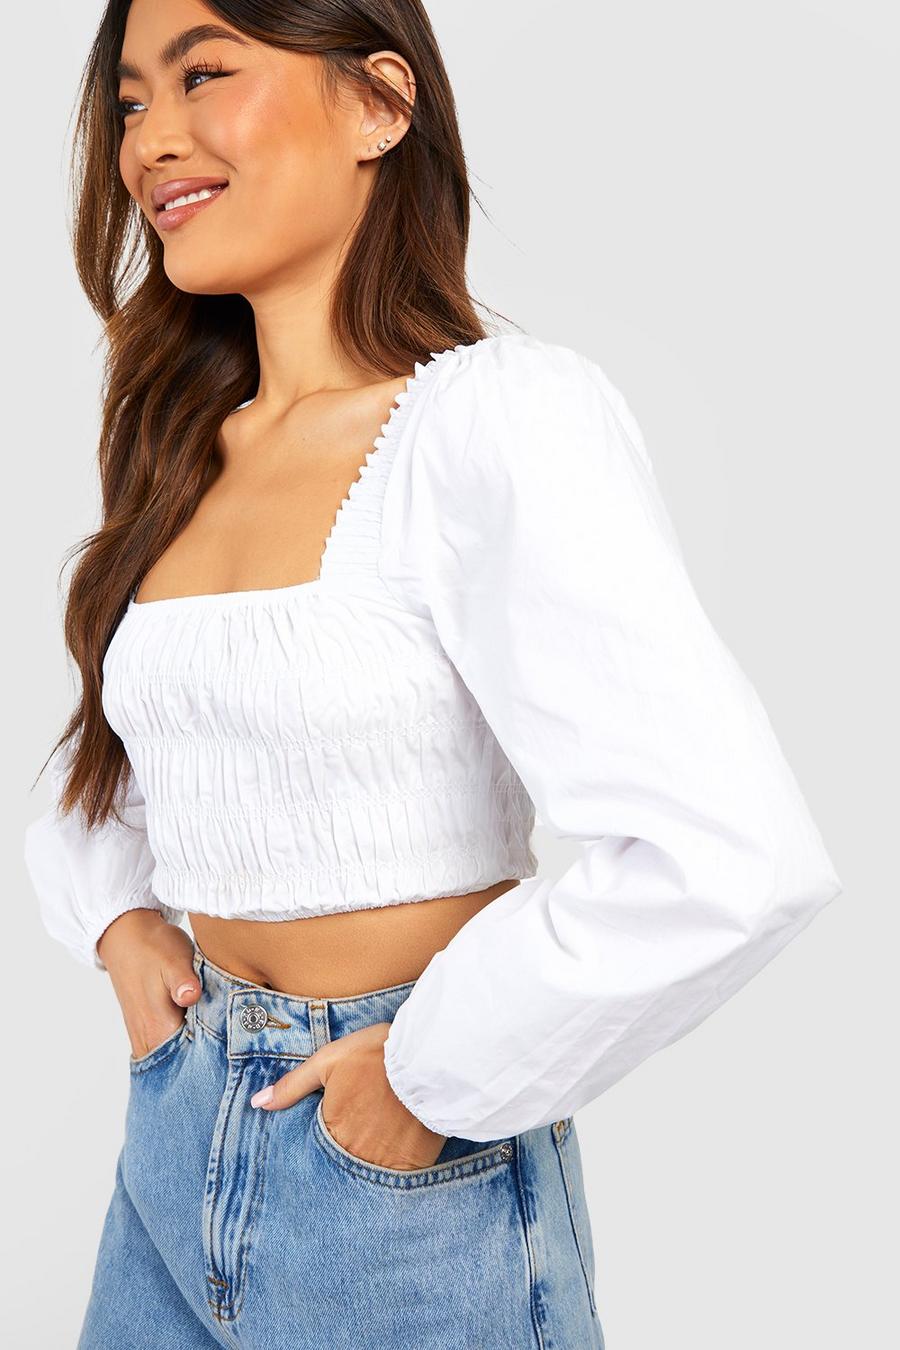 Women's Novelty T-Shirts Sexy Cold Shoulder Tops Summer Casual